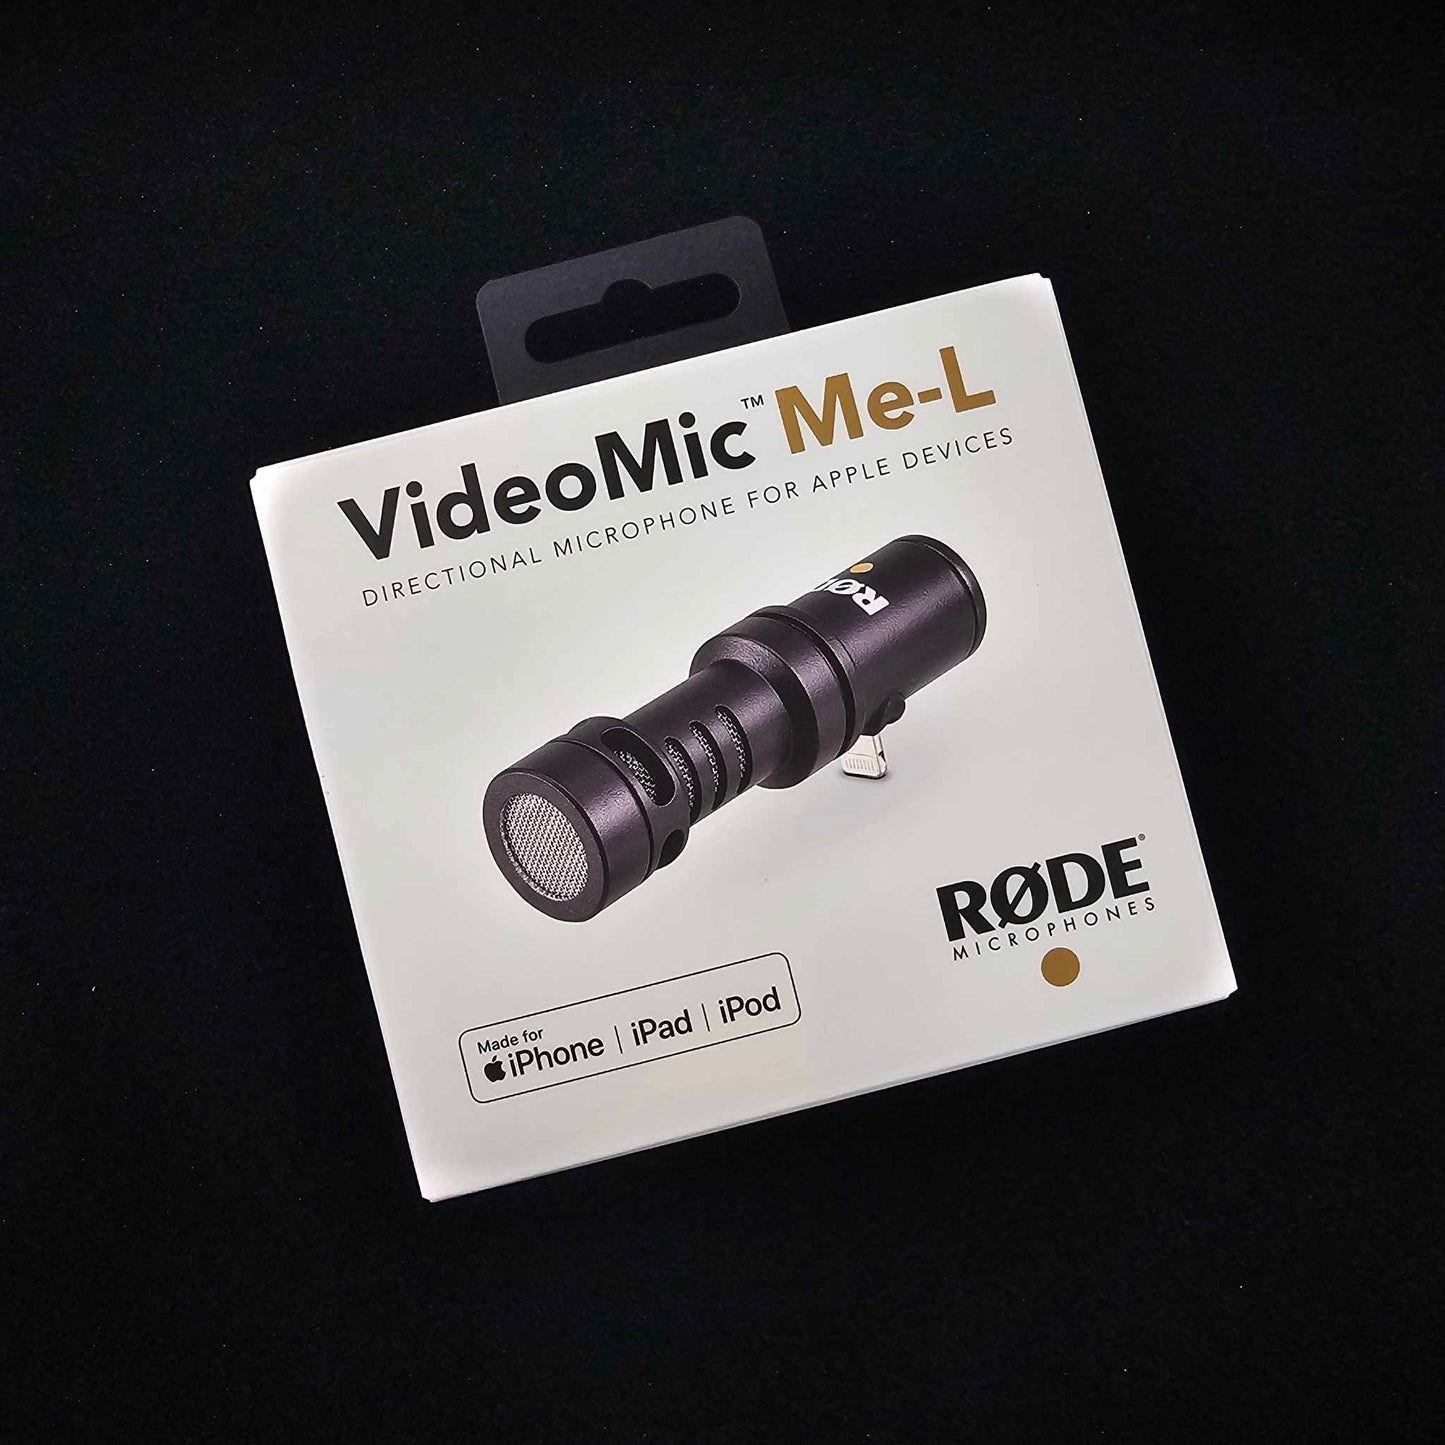 Rode VideoMic Me-L Directional Microphone for Apple Devices